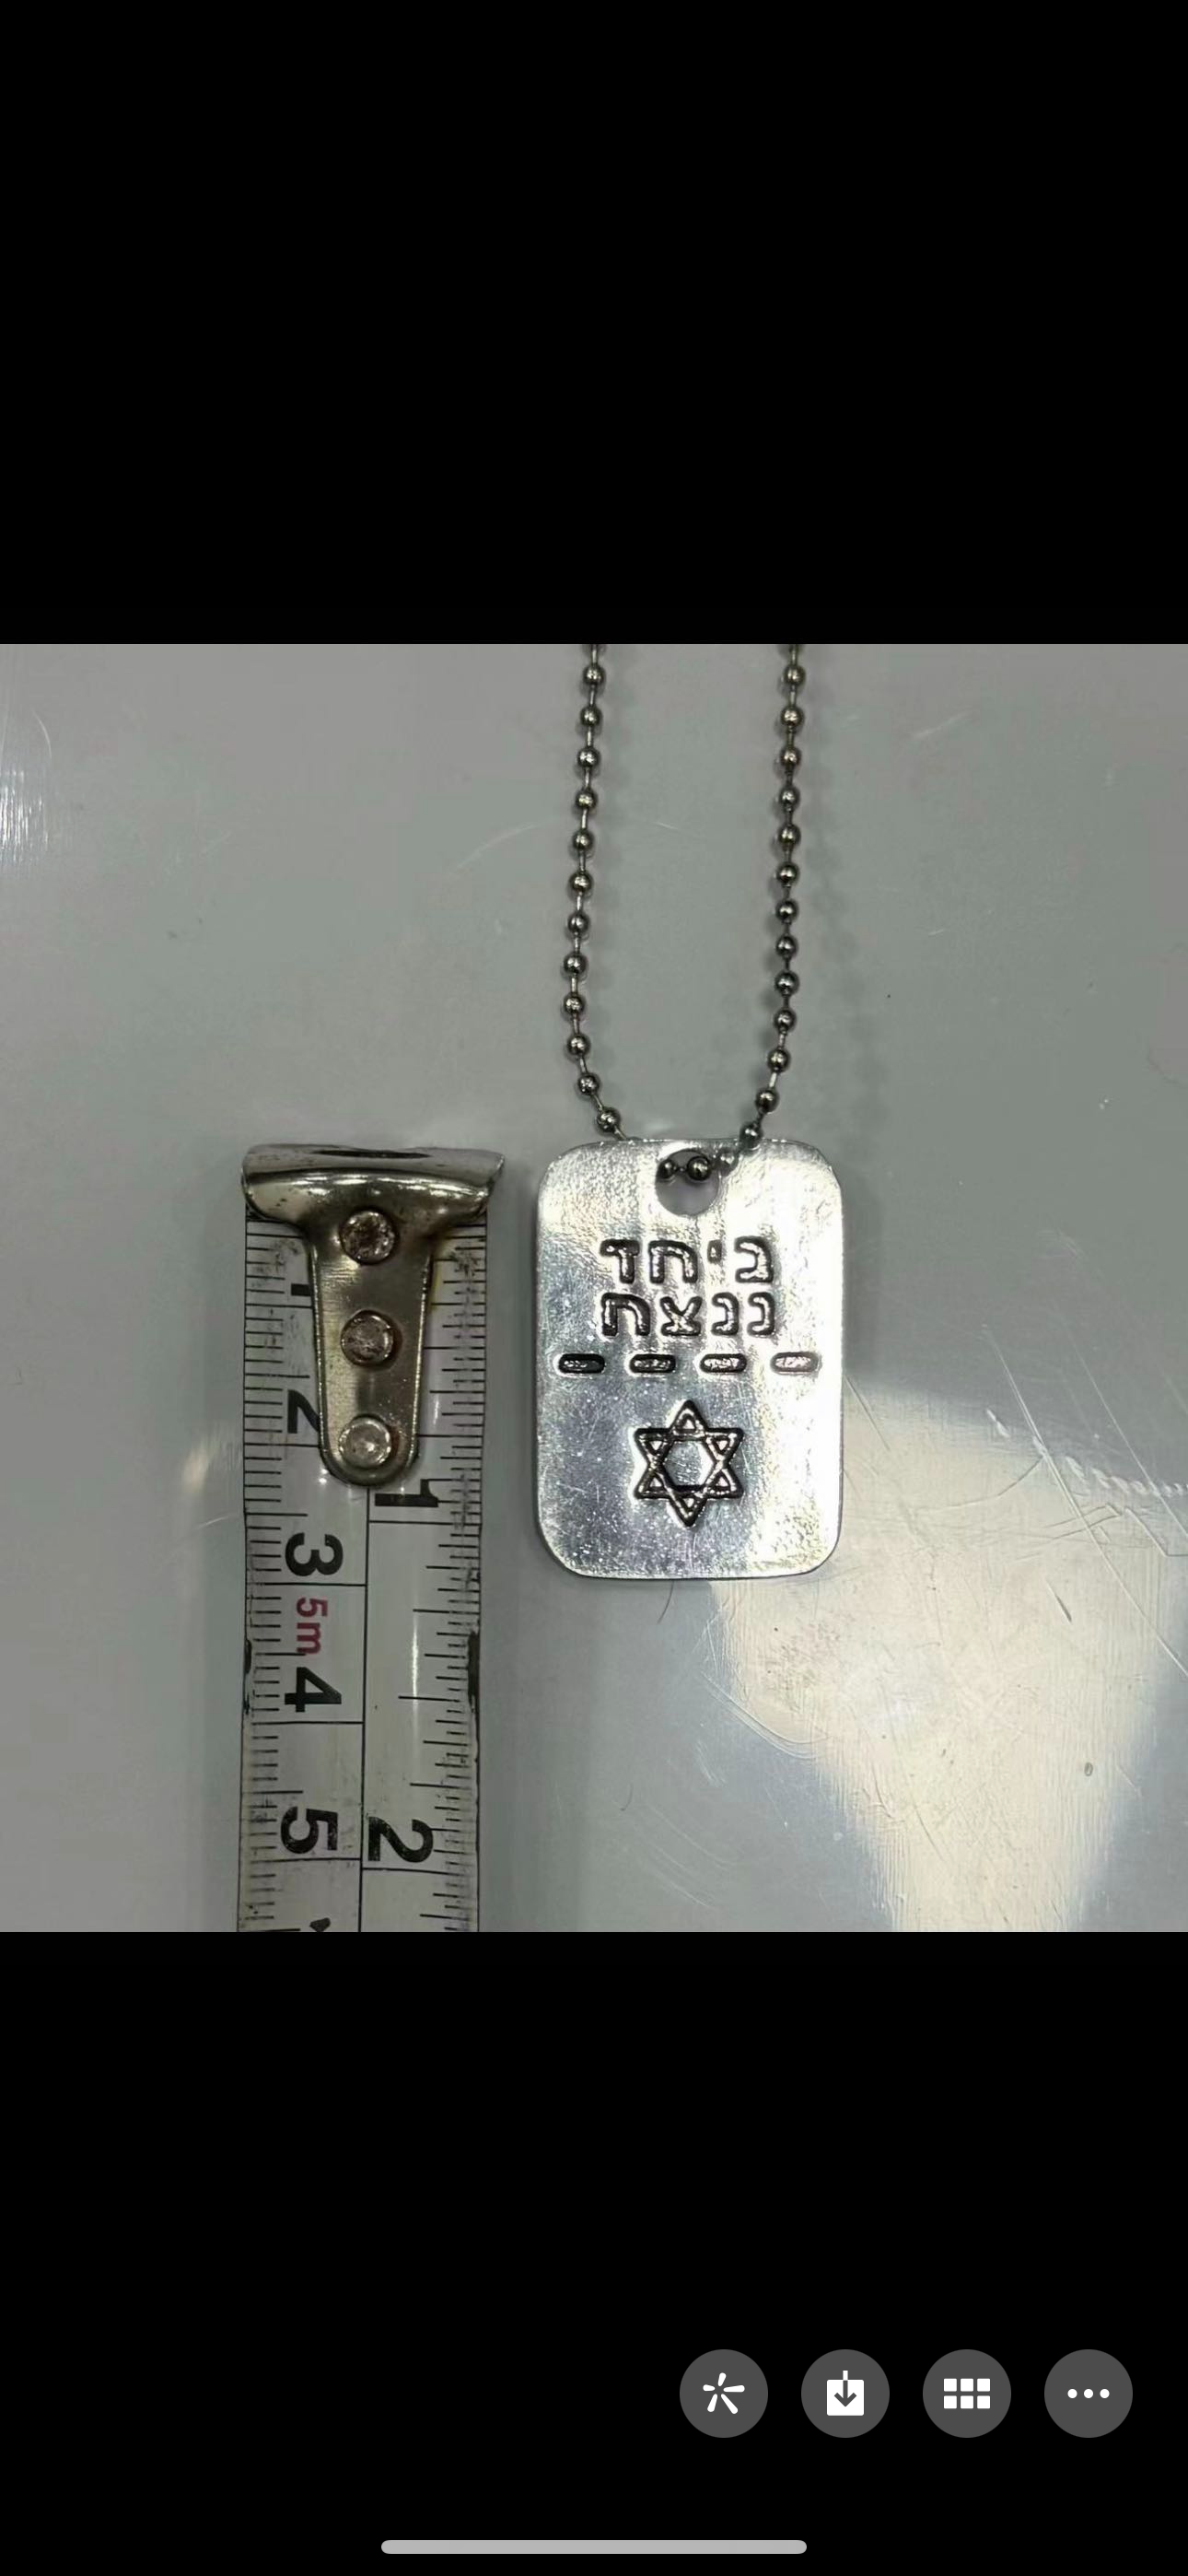 5 pack  Bring Them Home Now Two Sides Tag Necklace Jewelry Unisex Chain  show Support of Israel  Israel Dog Tag hand made in Israel  Small size  15% off today